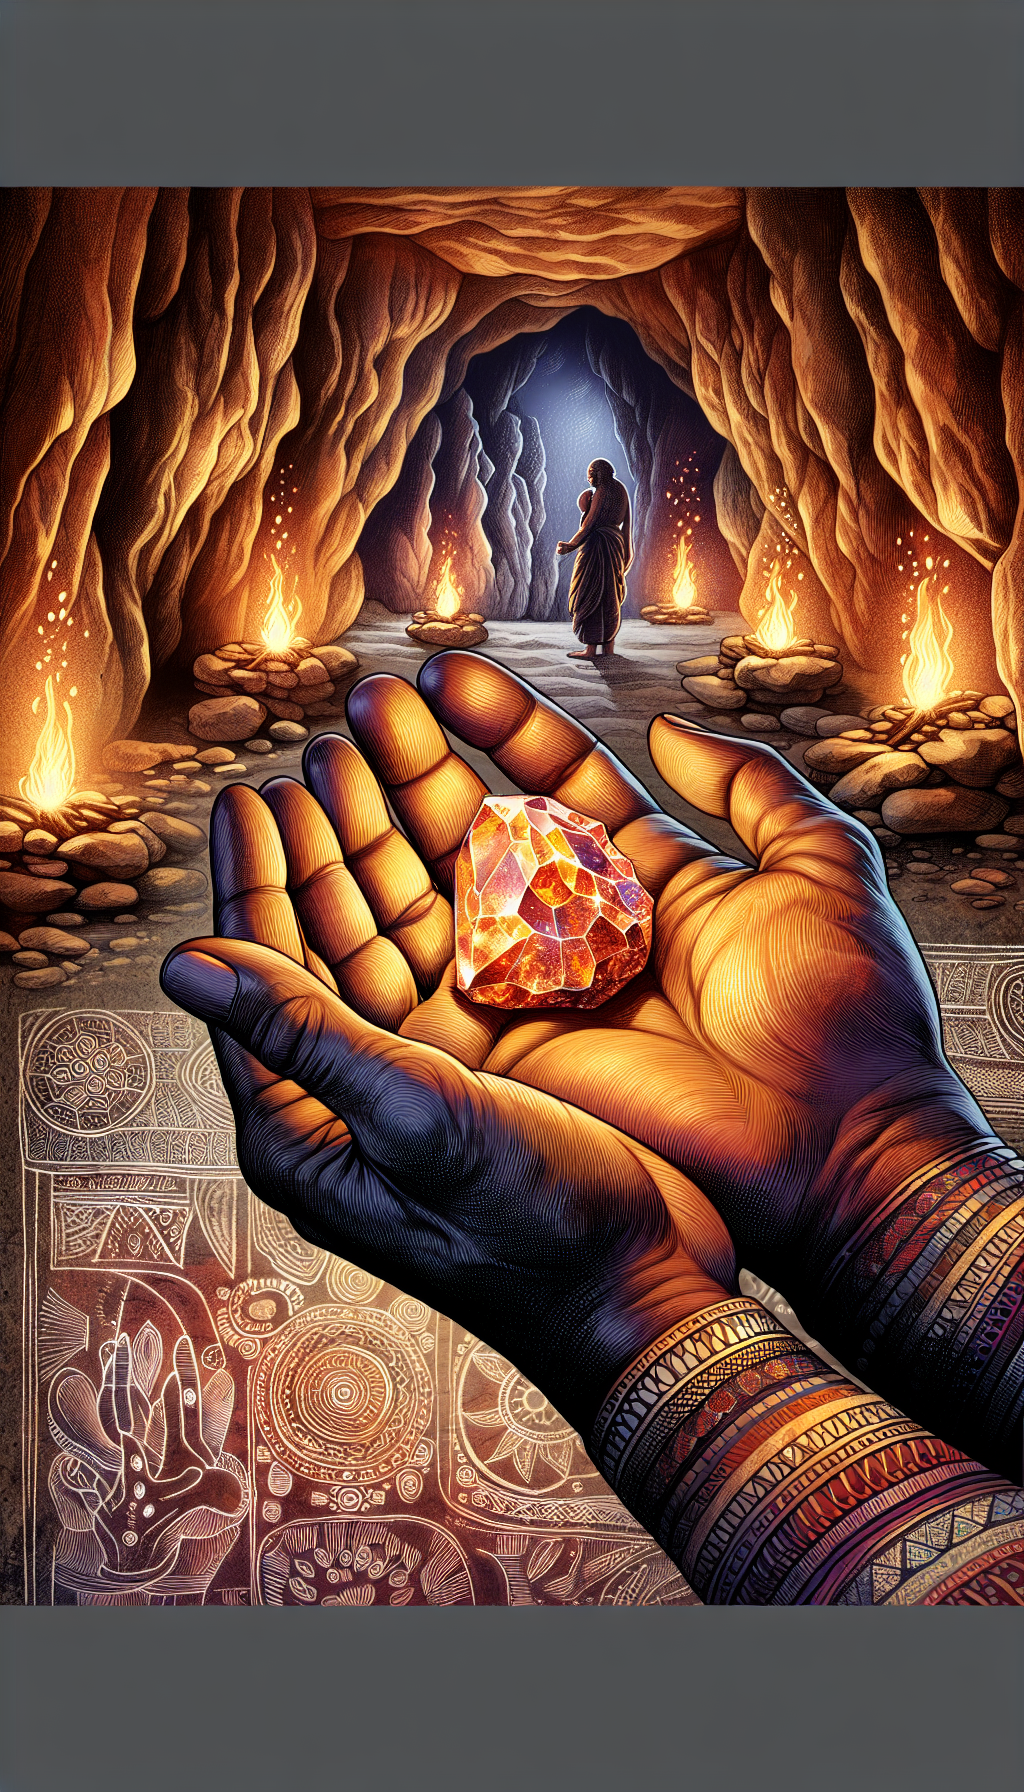 An evocative illustration depicts a pair of ancient, weathered hands cradling a vibrant, glistening quartz rock against a backdrop of cave paintings illuminated by firelight. The rock sparkles with detailed linework to suggest its intrinsic value, while a subtle overlay of geometric patterns nods to traditional Indian art, symbolizing the timeless legacy of fire starter rocks in Indian heritage.